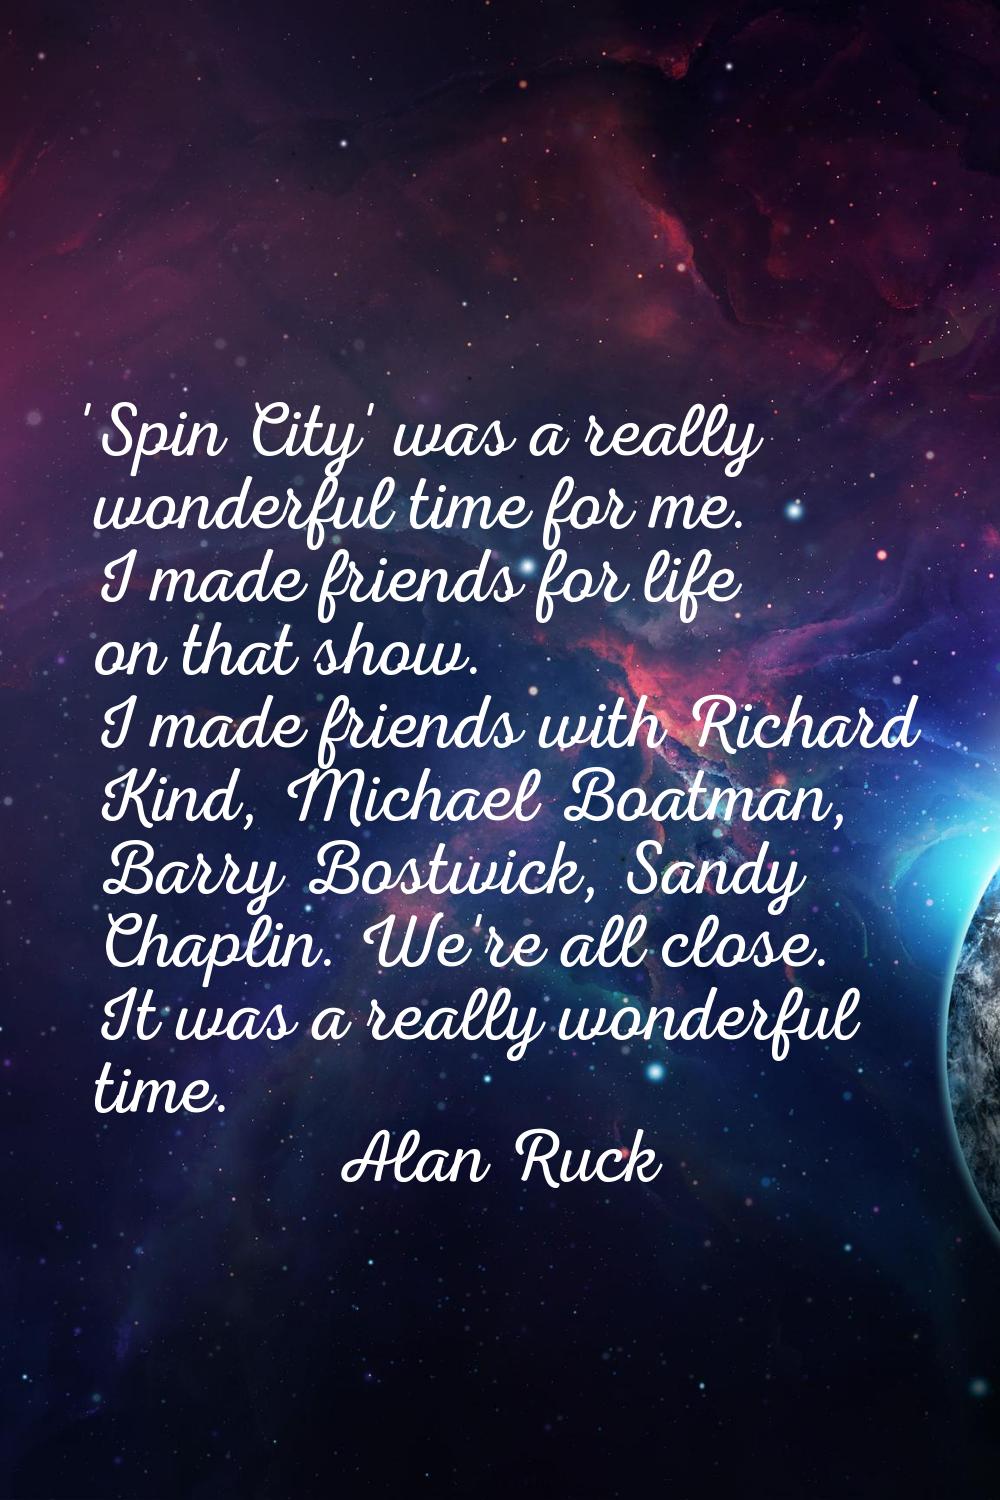 'Spin City' was a really wonderful time for me. I made friends for life on that show. I made friend